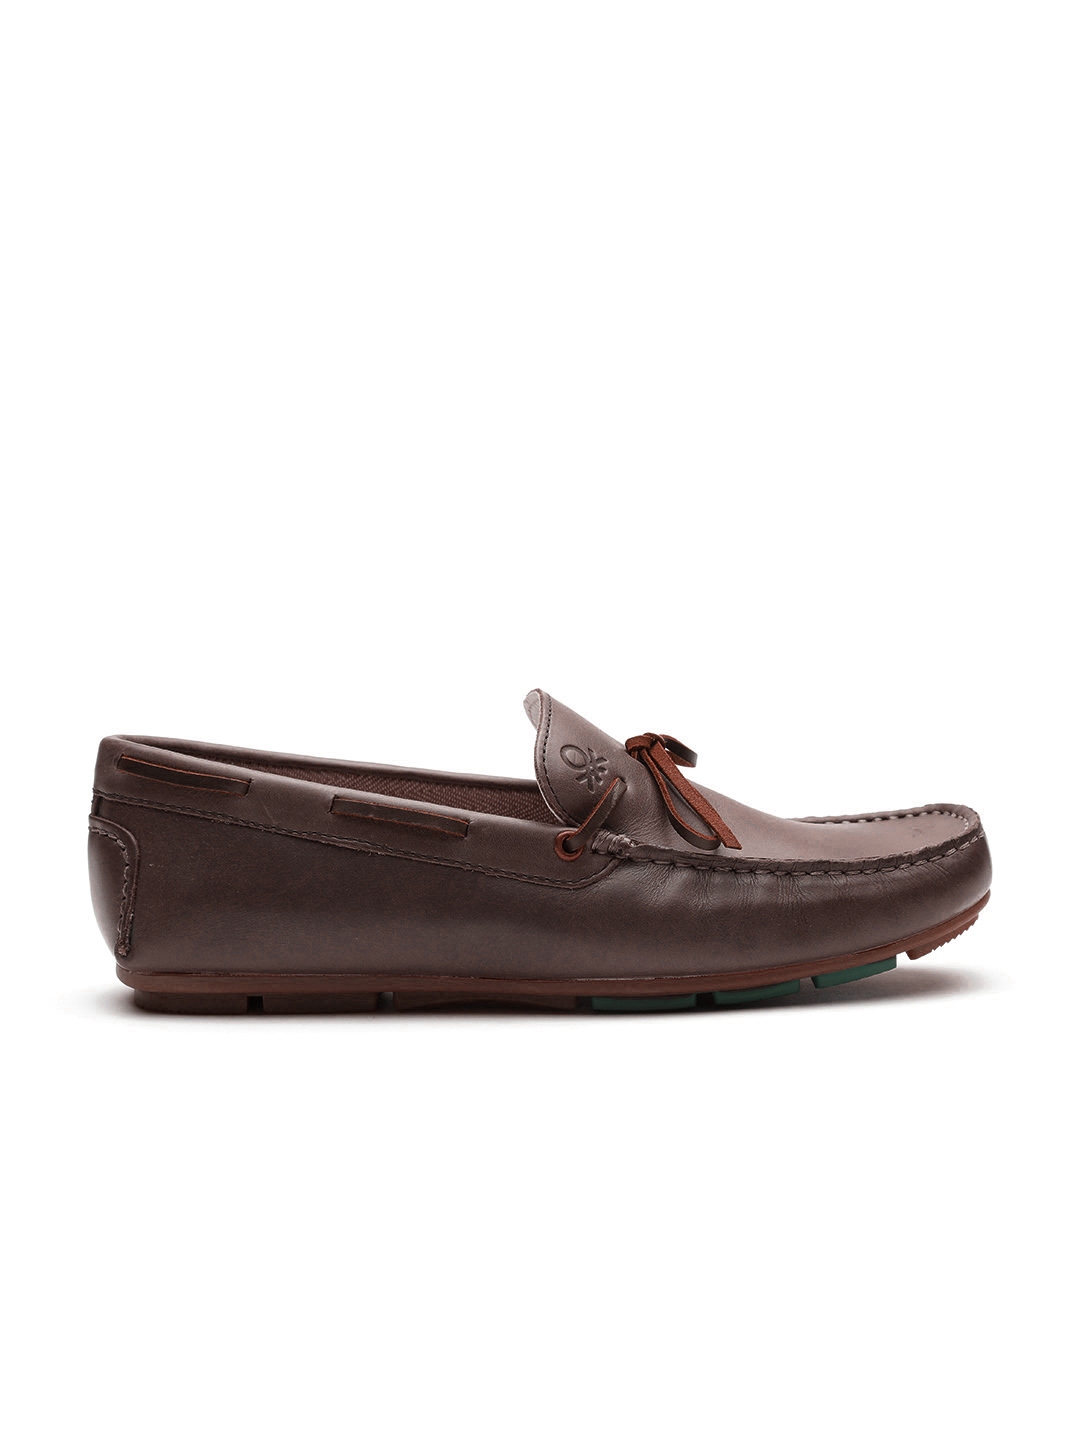 Buy United Colors Of Benetton Men Brown Leather Loafers - Casual Shoes ...